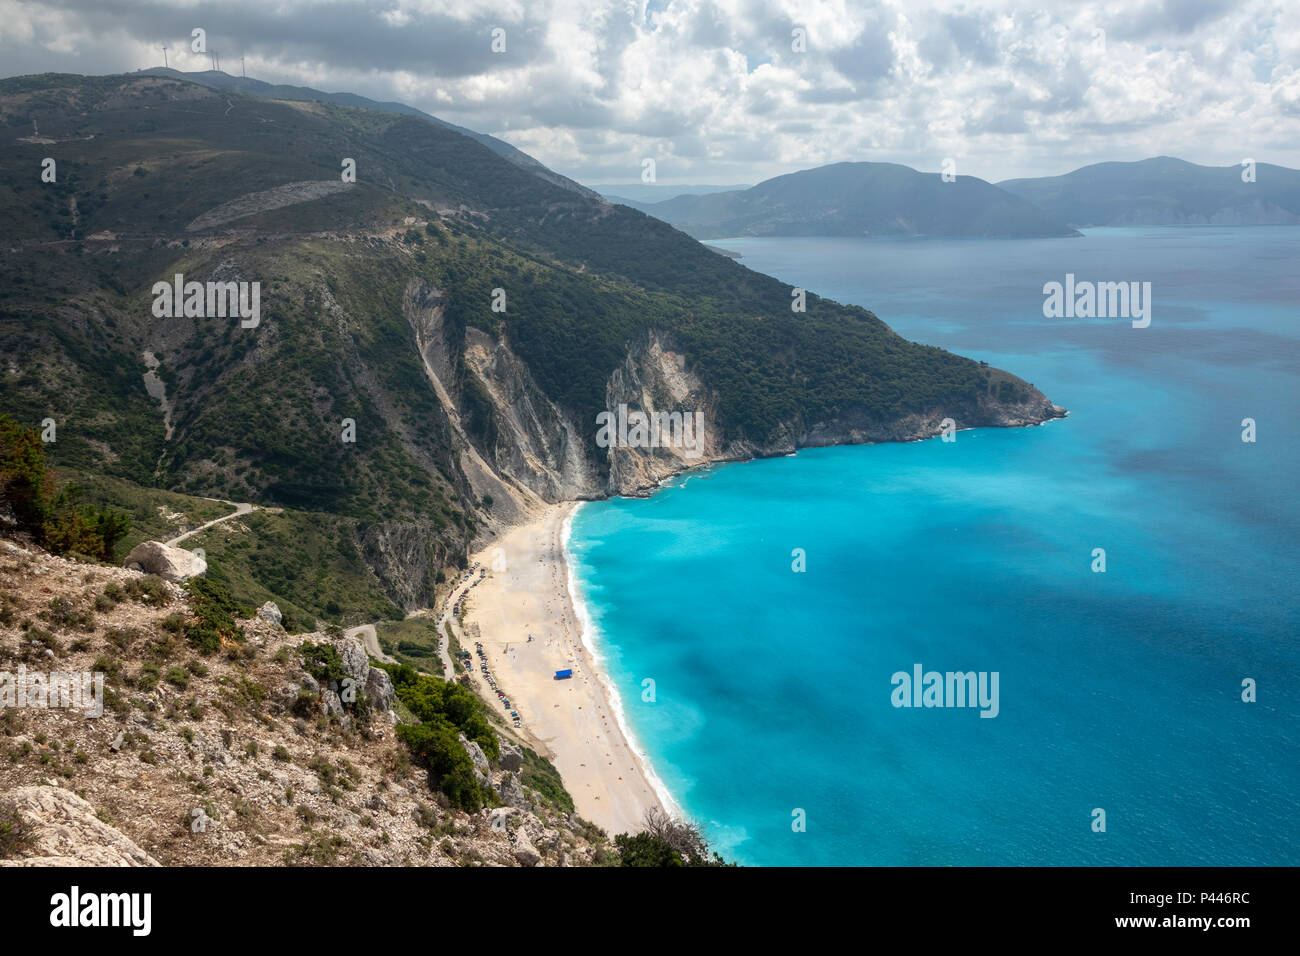 Myrtos Beach in the region of Pylaros, in the north-west of Kefalonia island, in the Ionian Sea of Greece. Stock Photo